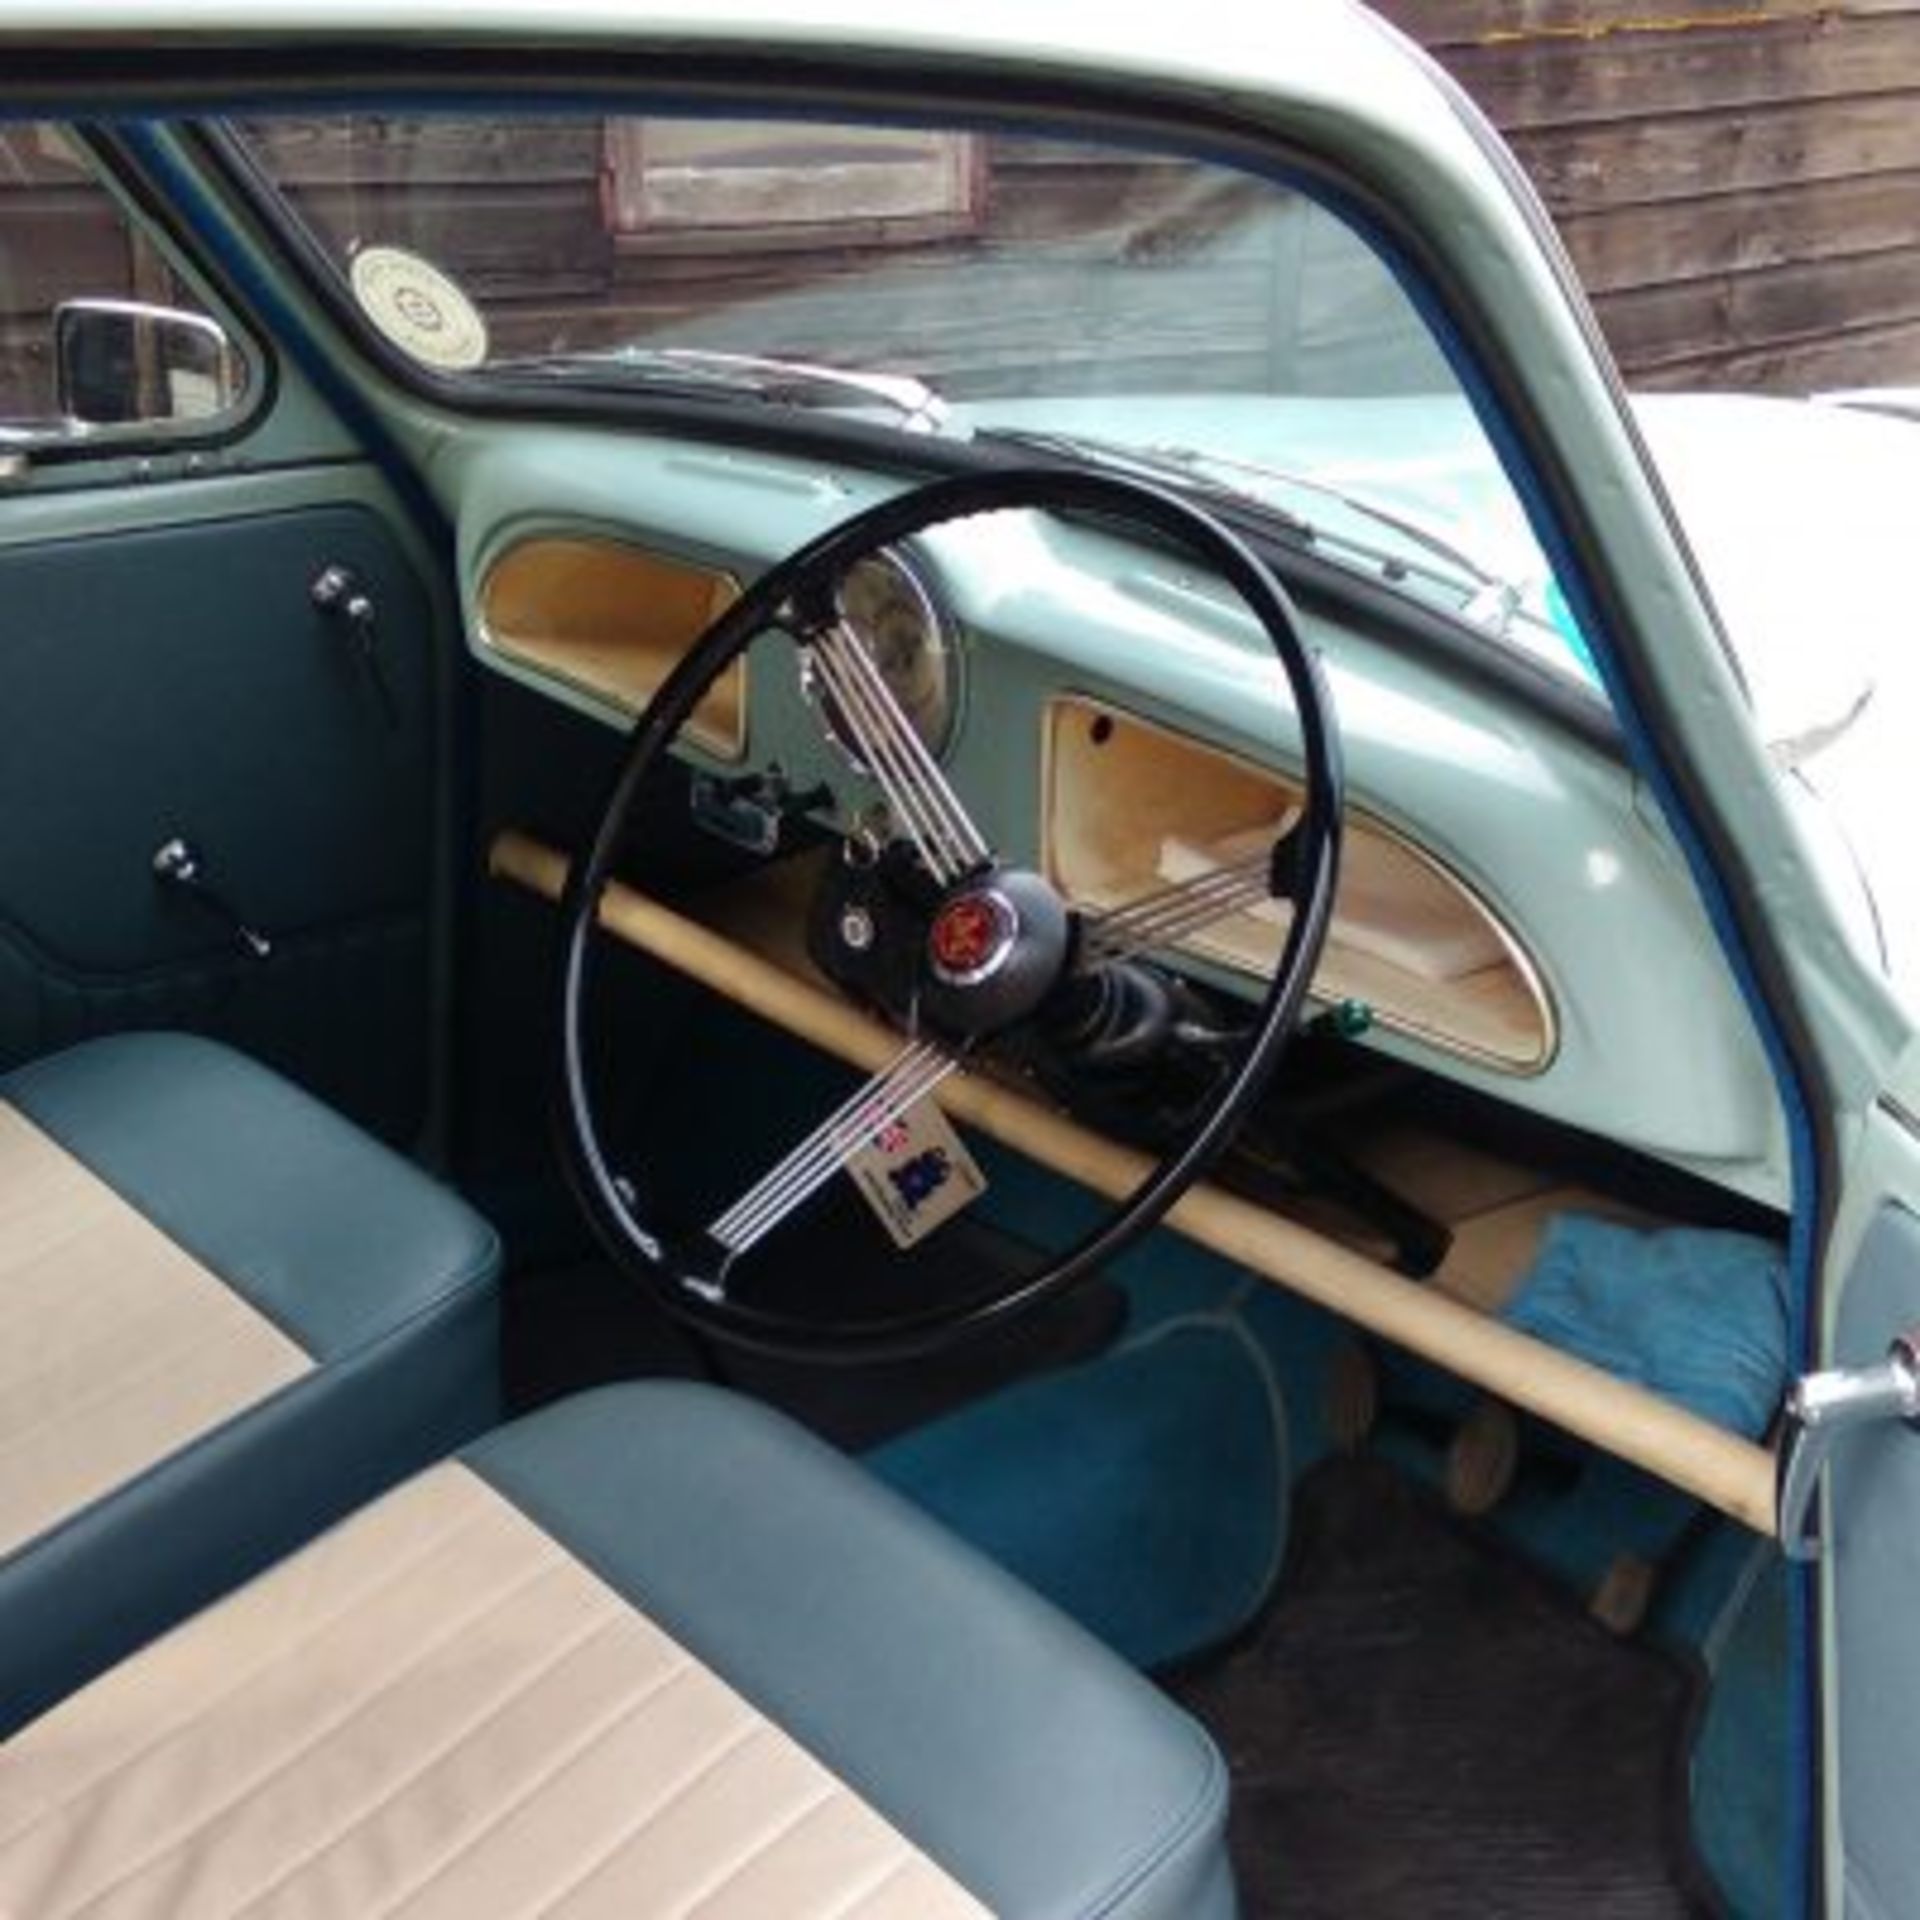 Morris Minor “Low mileage” 1964 - This lovely low mileage 1964 “Moggy Minor” has been owned by the - Image 7 of 14